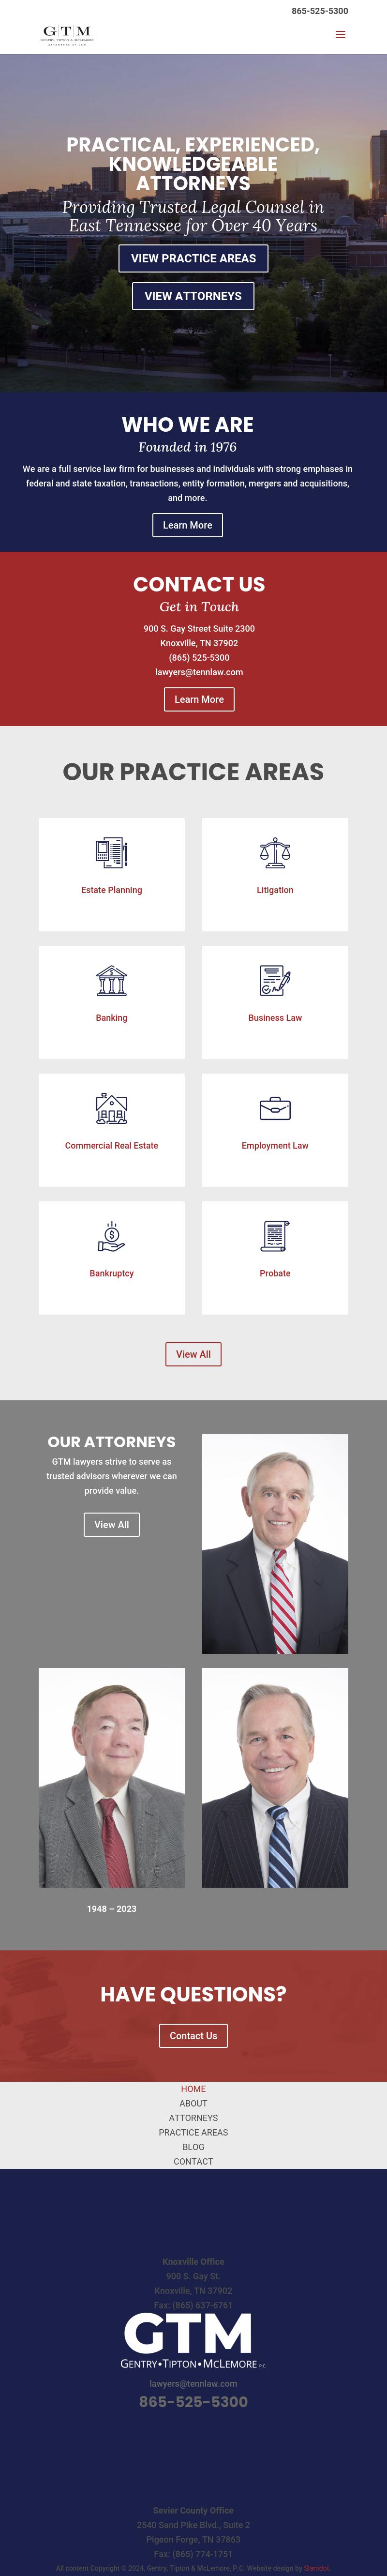 Gentry, Tipton & McLemore, P.C. - Knoxville TN Lawyers